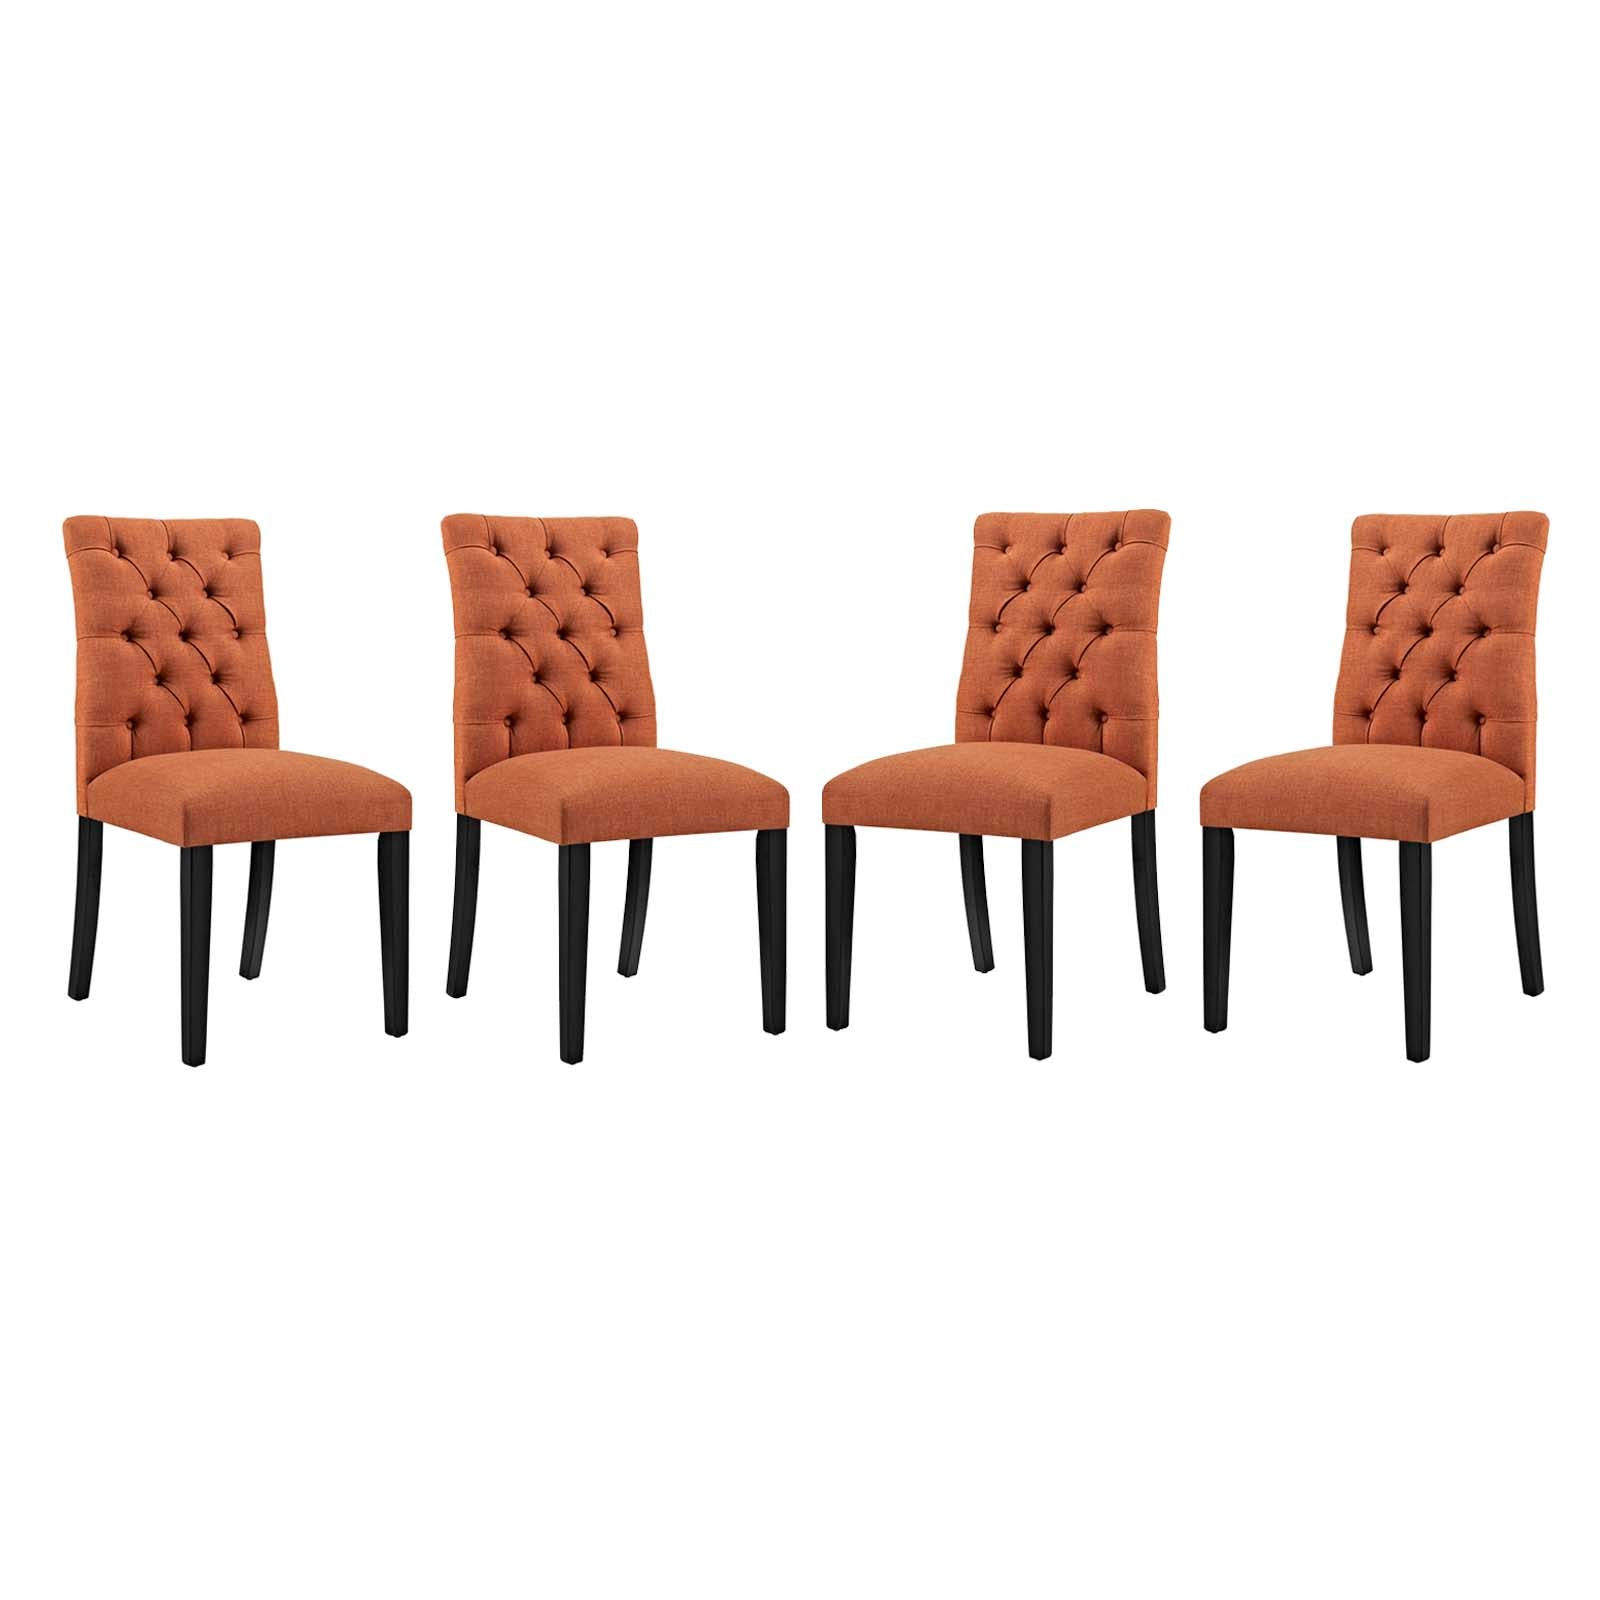 Modway Dining Chairs - Duchess Dining Chair Fabric ( Set of 4 ) Orange